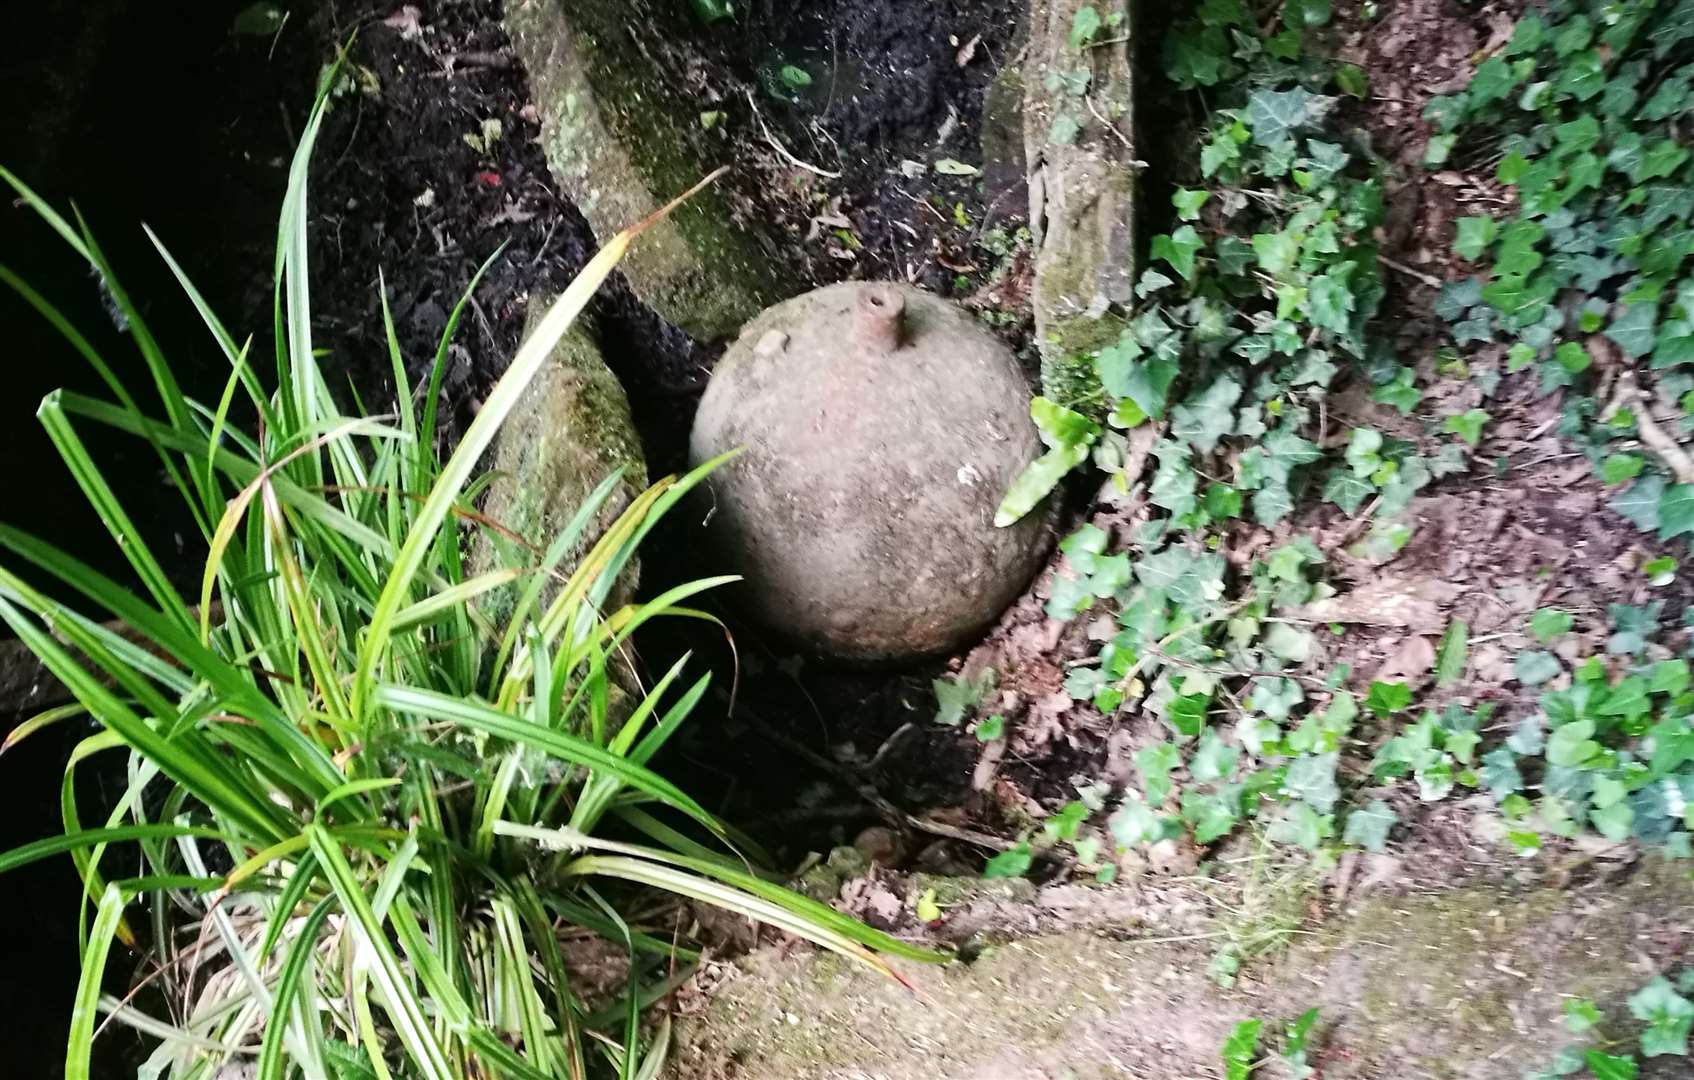 A suspected "wartime bomb" was found in woodland in Sandling. Picture: Martin Simpson